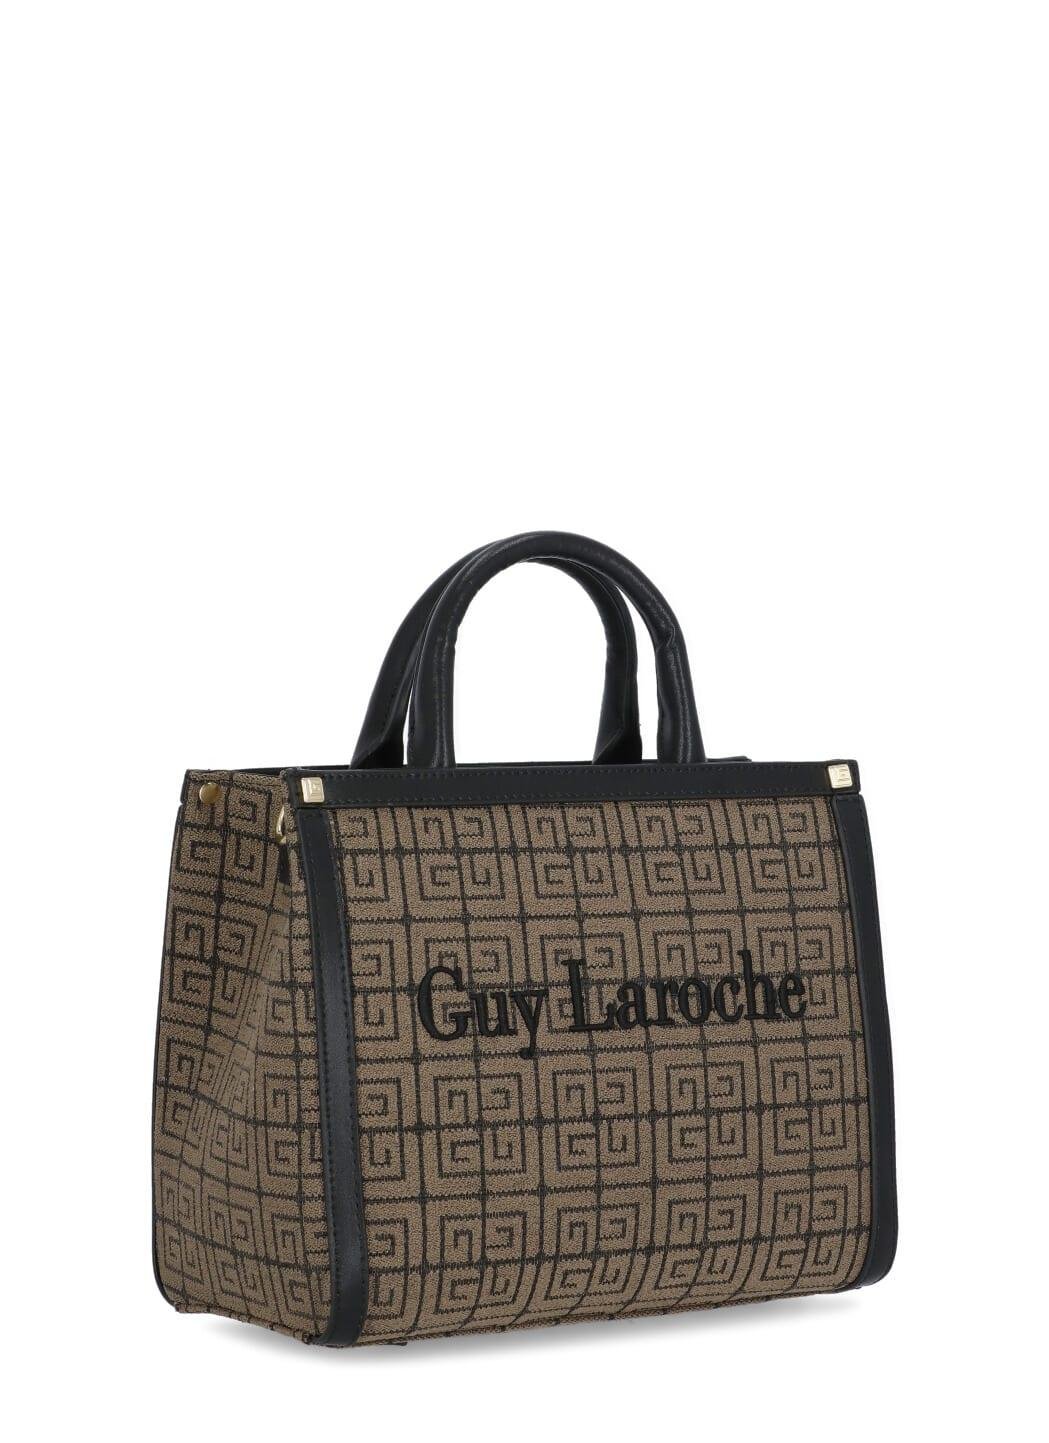 Guy Laroche women's bag with all-over logo Brown